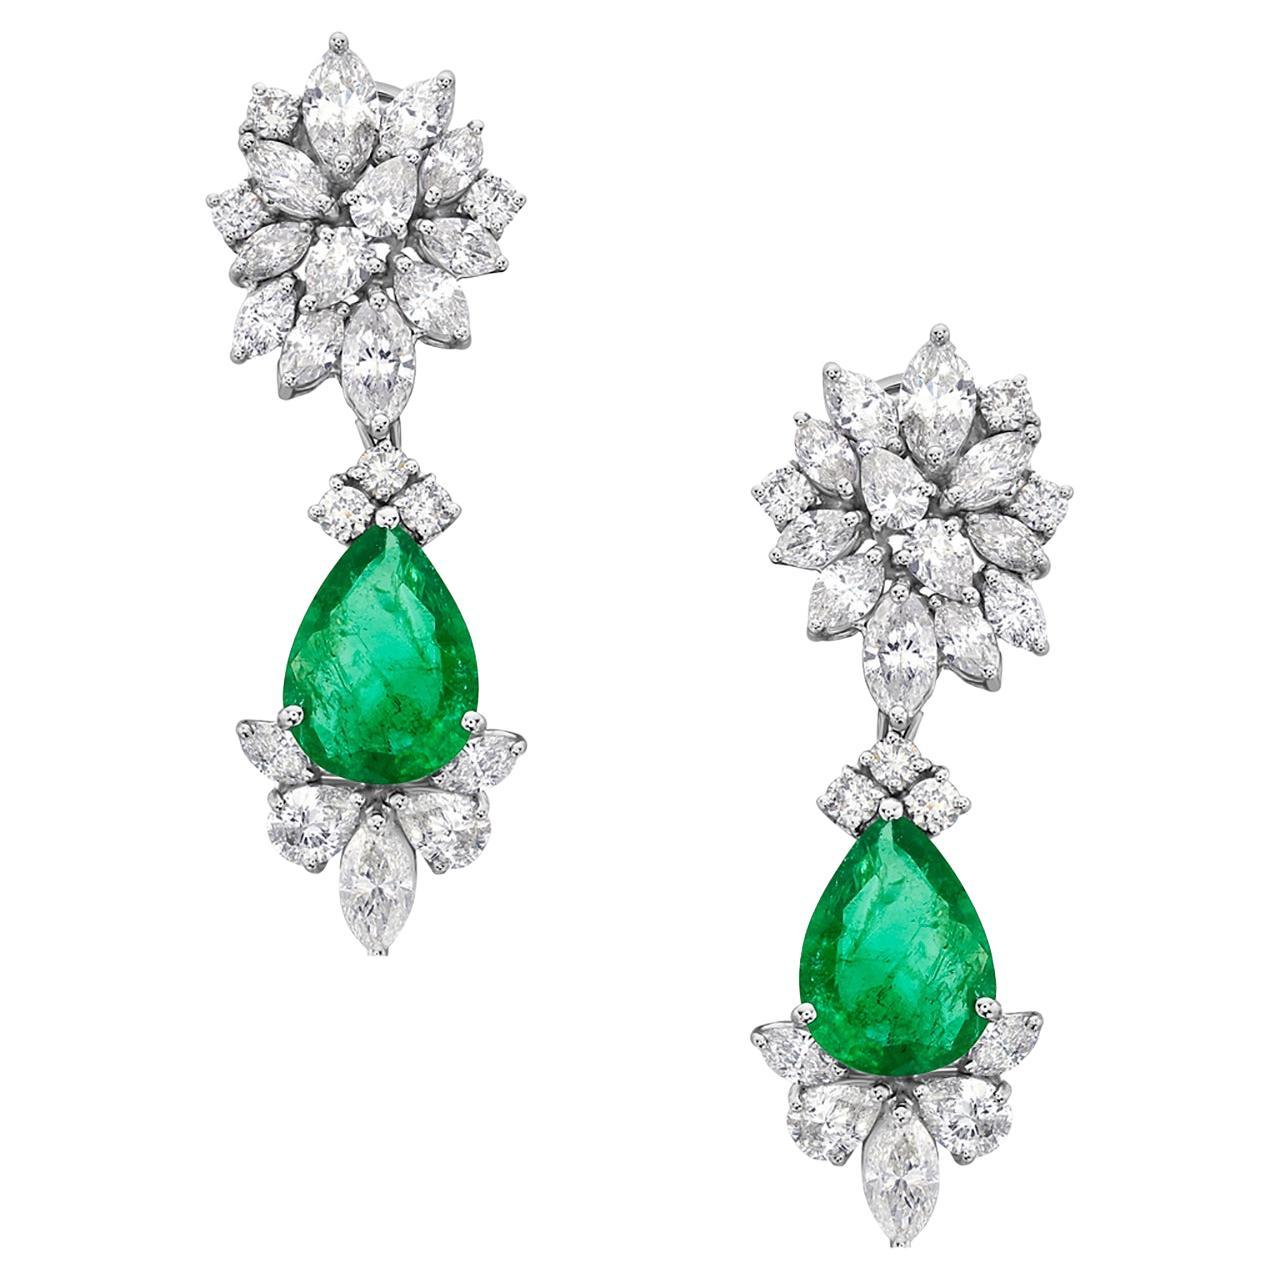 Starburst Earrings With Zambian Emerald Accented With Diamonds In 18k White Gold For Sale